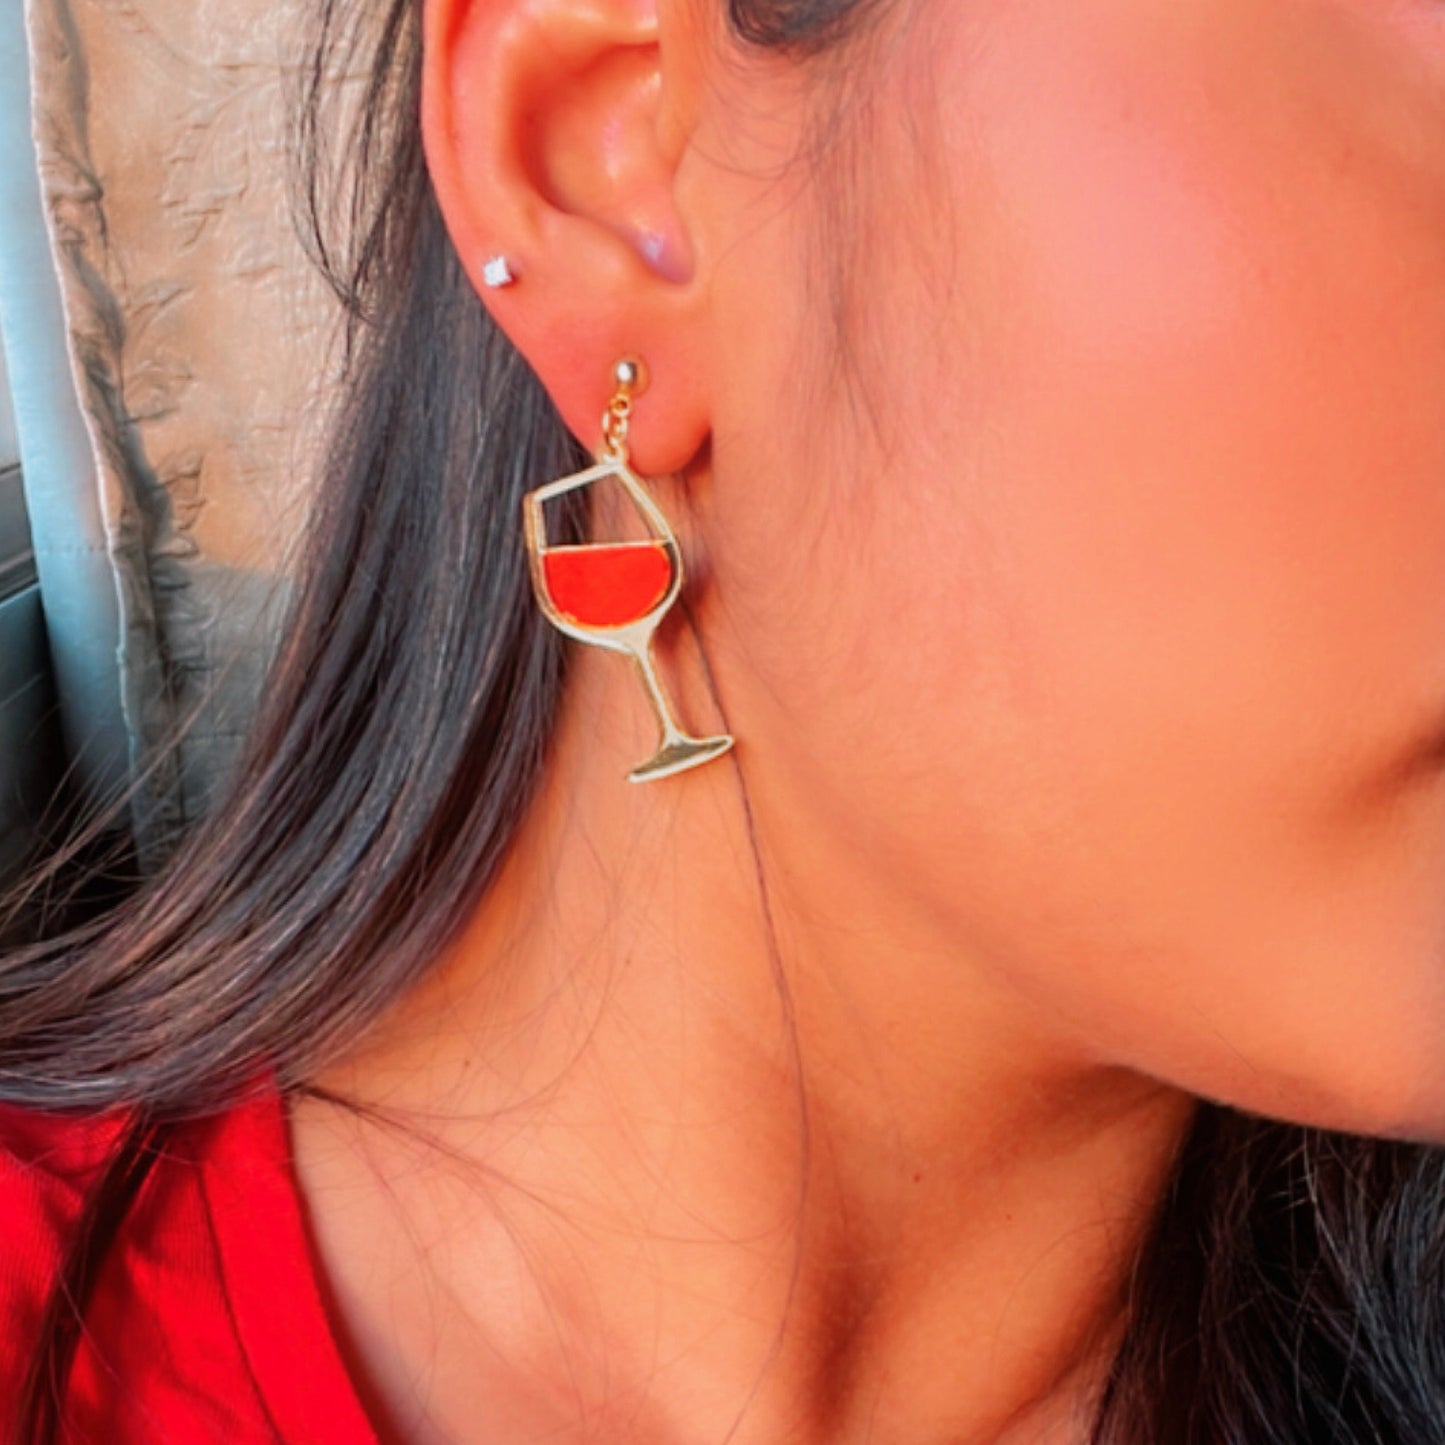 Wine Goblet Earrings - Glossy Red and Golden - Nian by Nidhi - worn by a woman